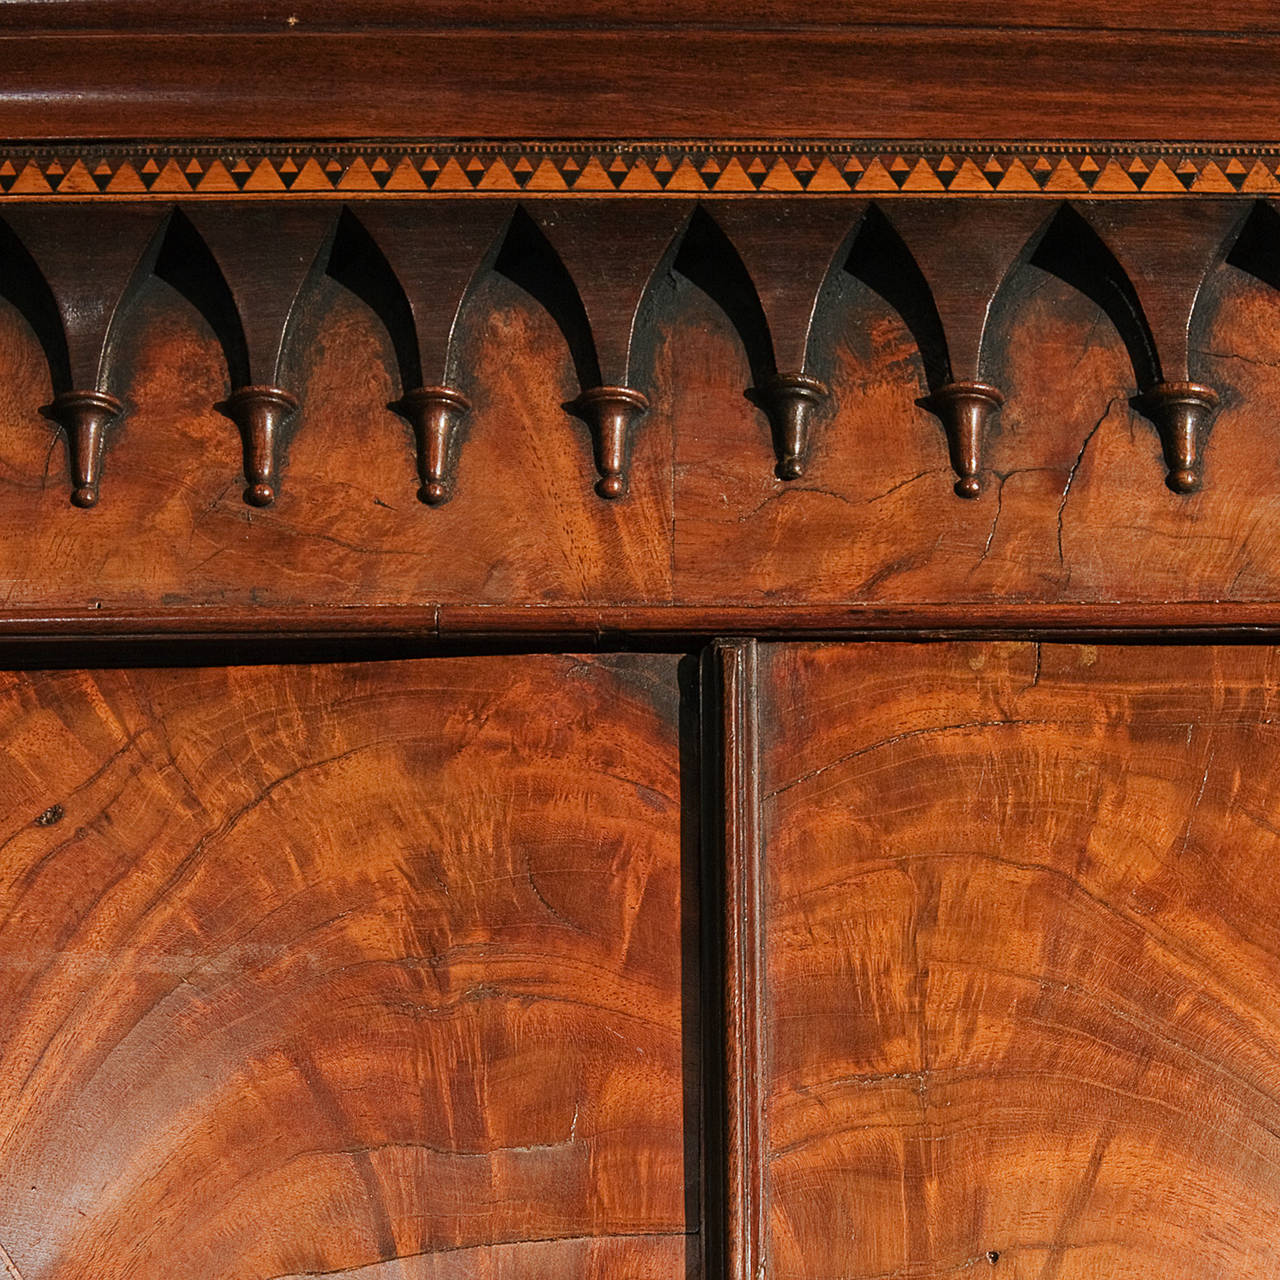 Provenance: Acquired directly from a private collection, Cardiff, Wales.

This late 18th century linen press, veneered in Honduras mahogany of an exceptional golden colour and vigour, inlaid with Tunbridge ware, is in an excellent state of